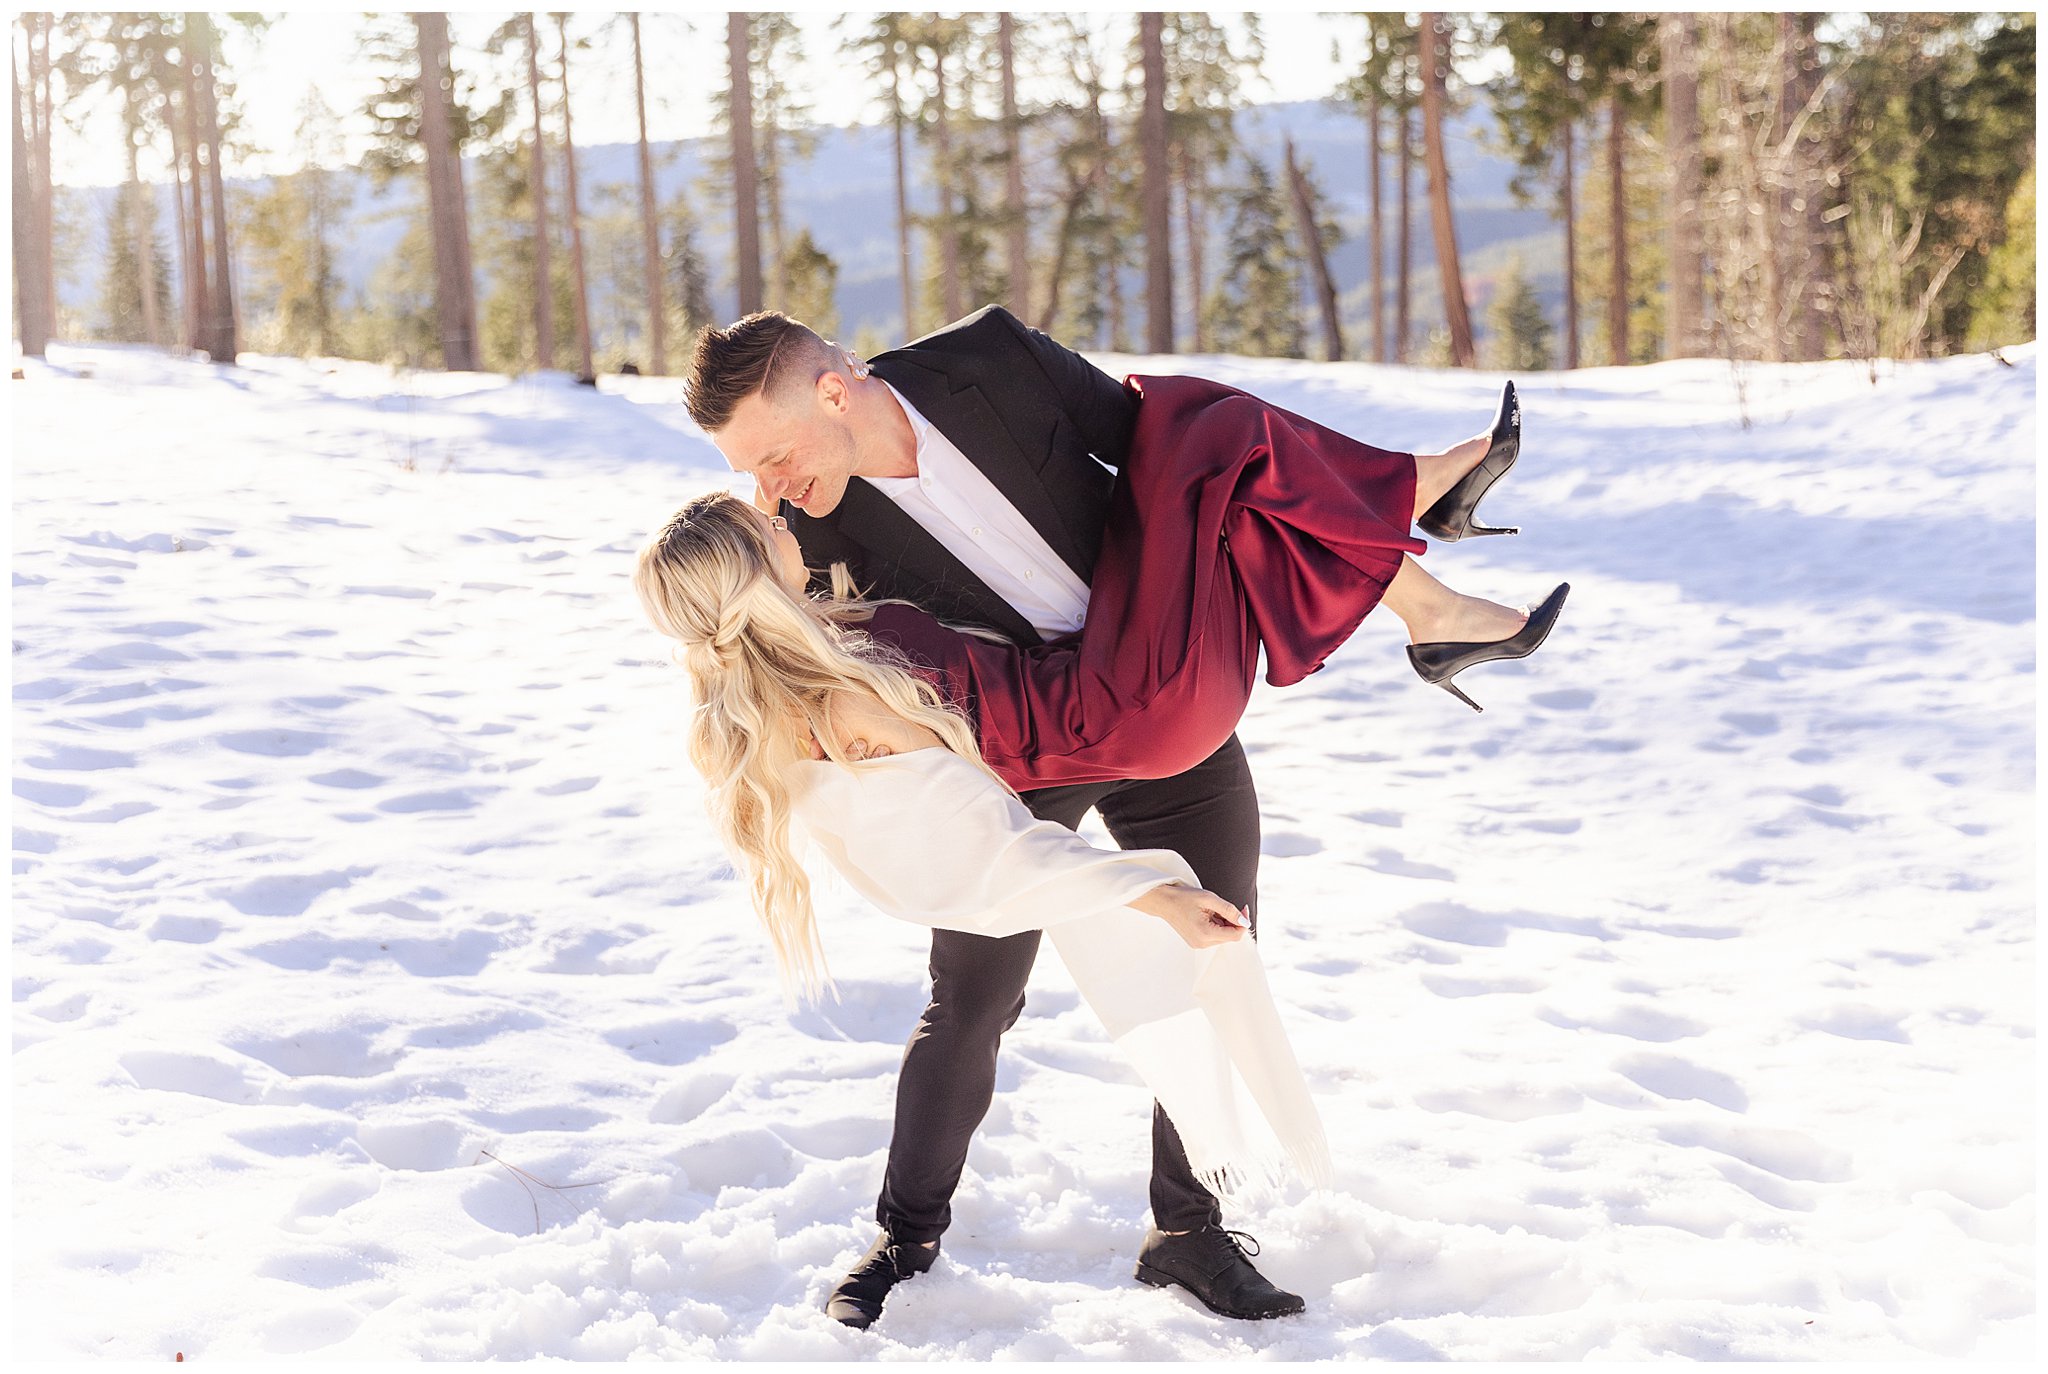 Snowy Engagement Session Butte Meadows CA Formal Black Jacket Peregrine Point Disc Golf Course Chico CA Hat,